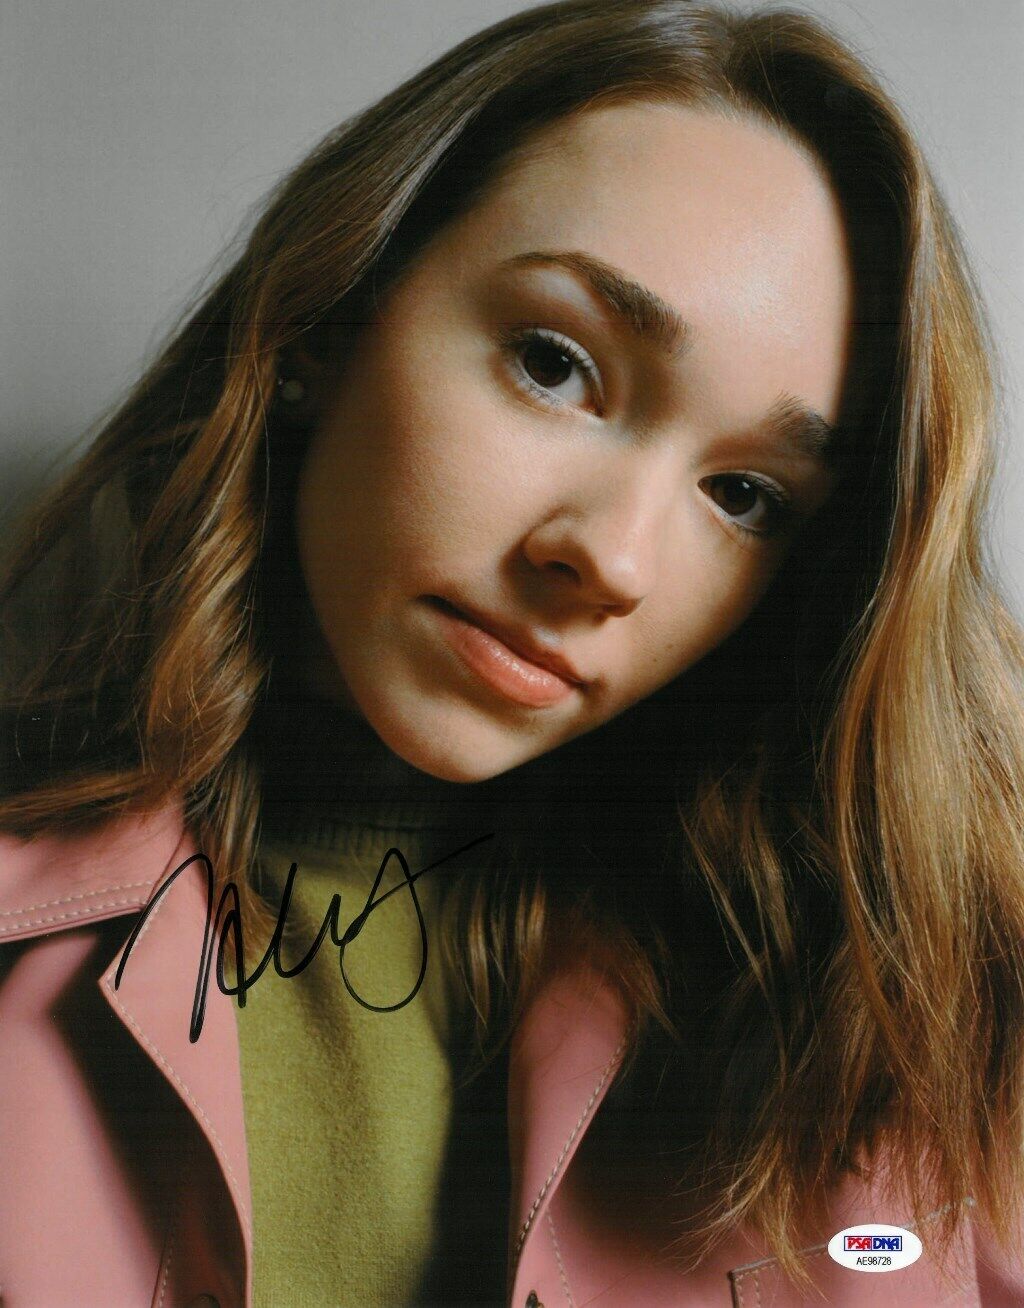 Holly Taylor Signed Authentic Autographed 11x14 Photo Poster painting PSA/DNA #AE98728